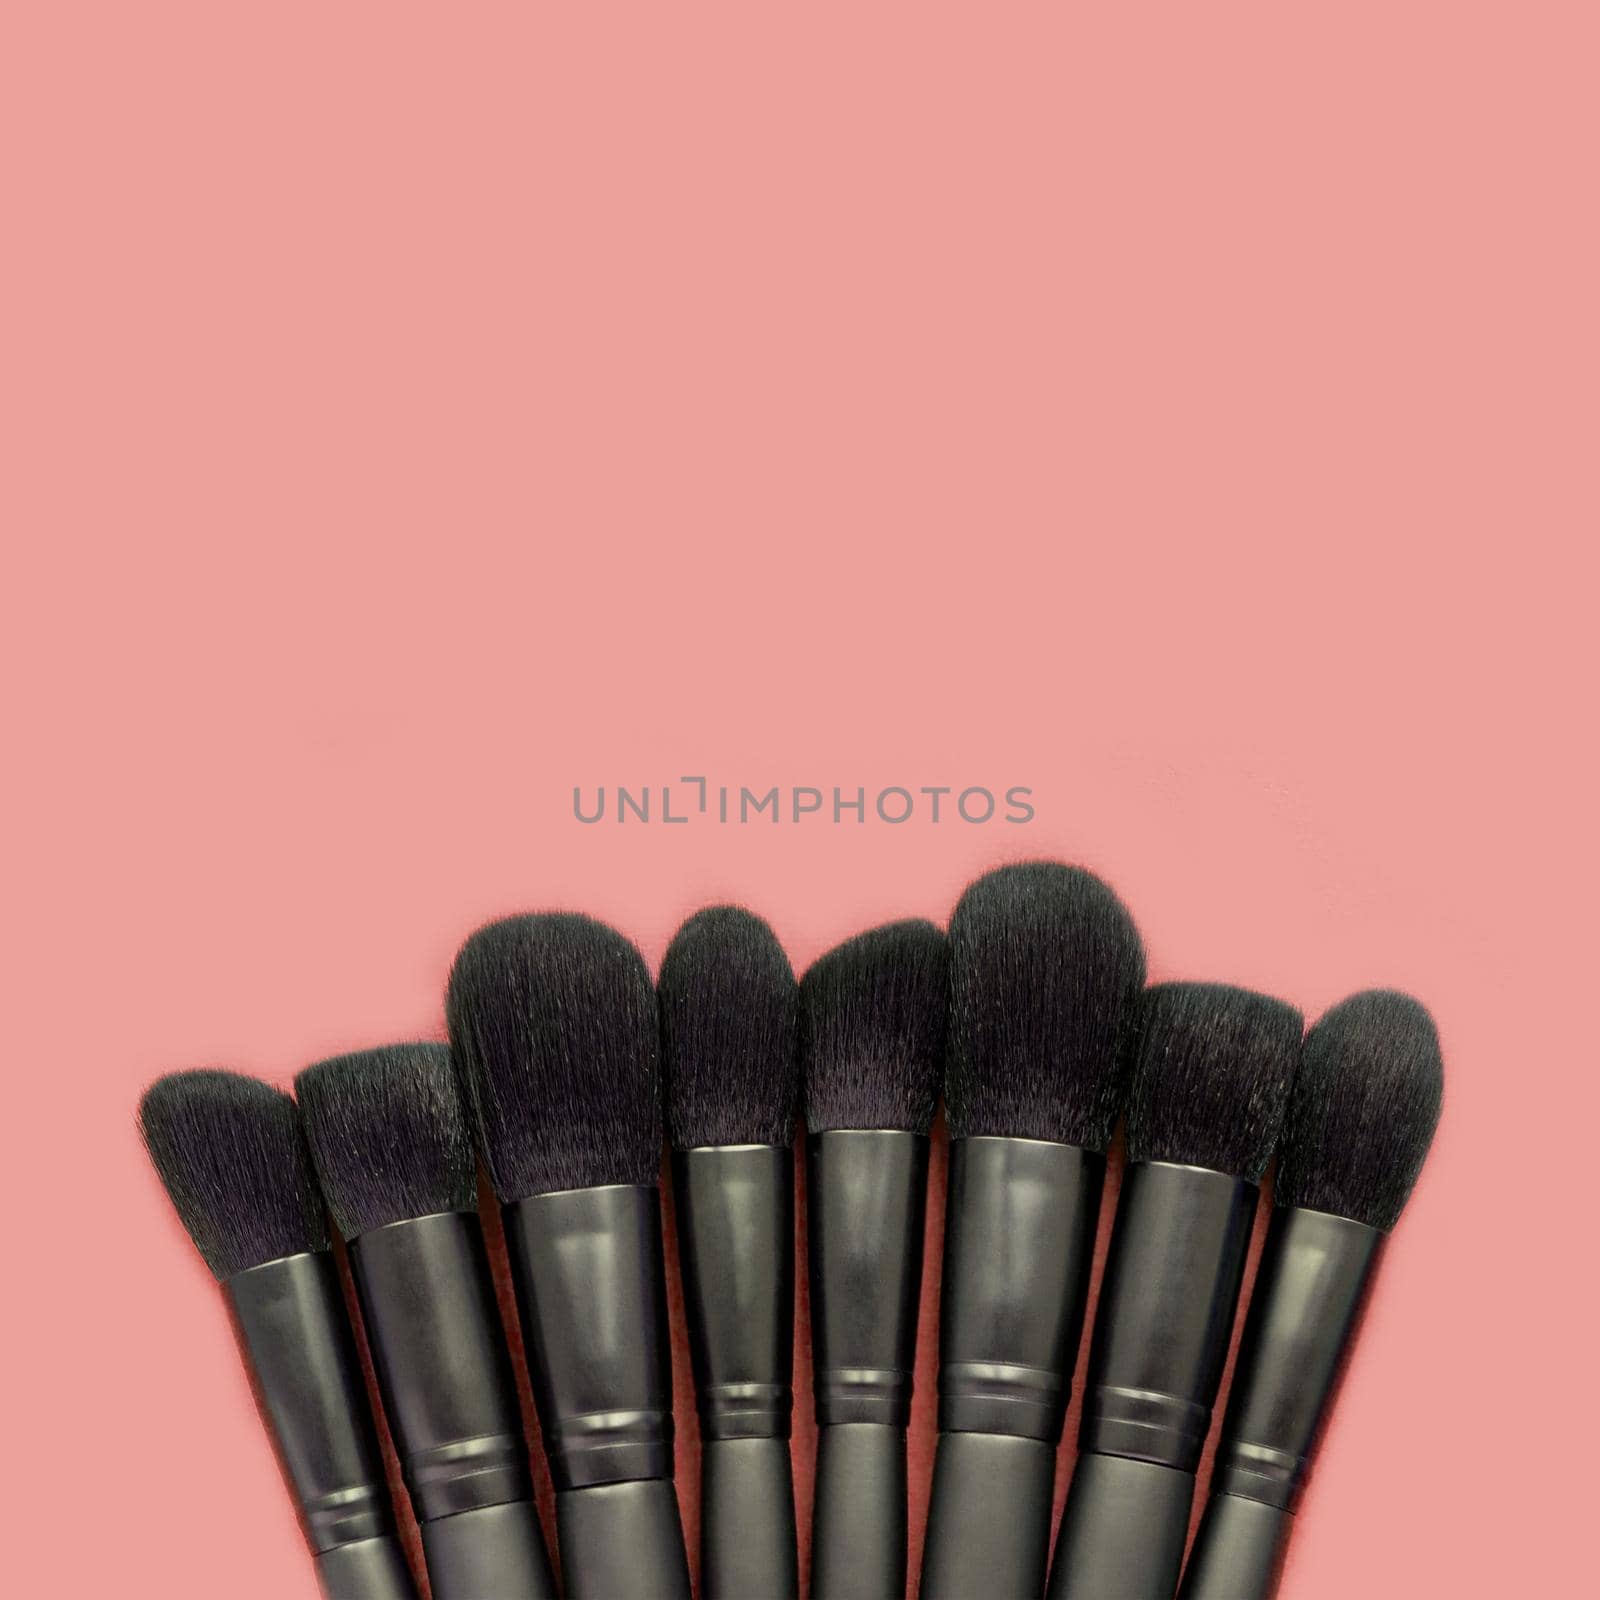 Flat lay of black makeup brushes on peachy background by dmitryz